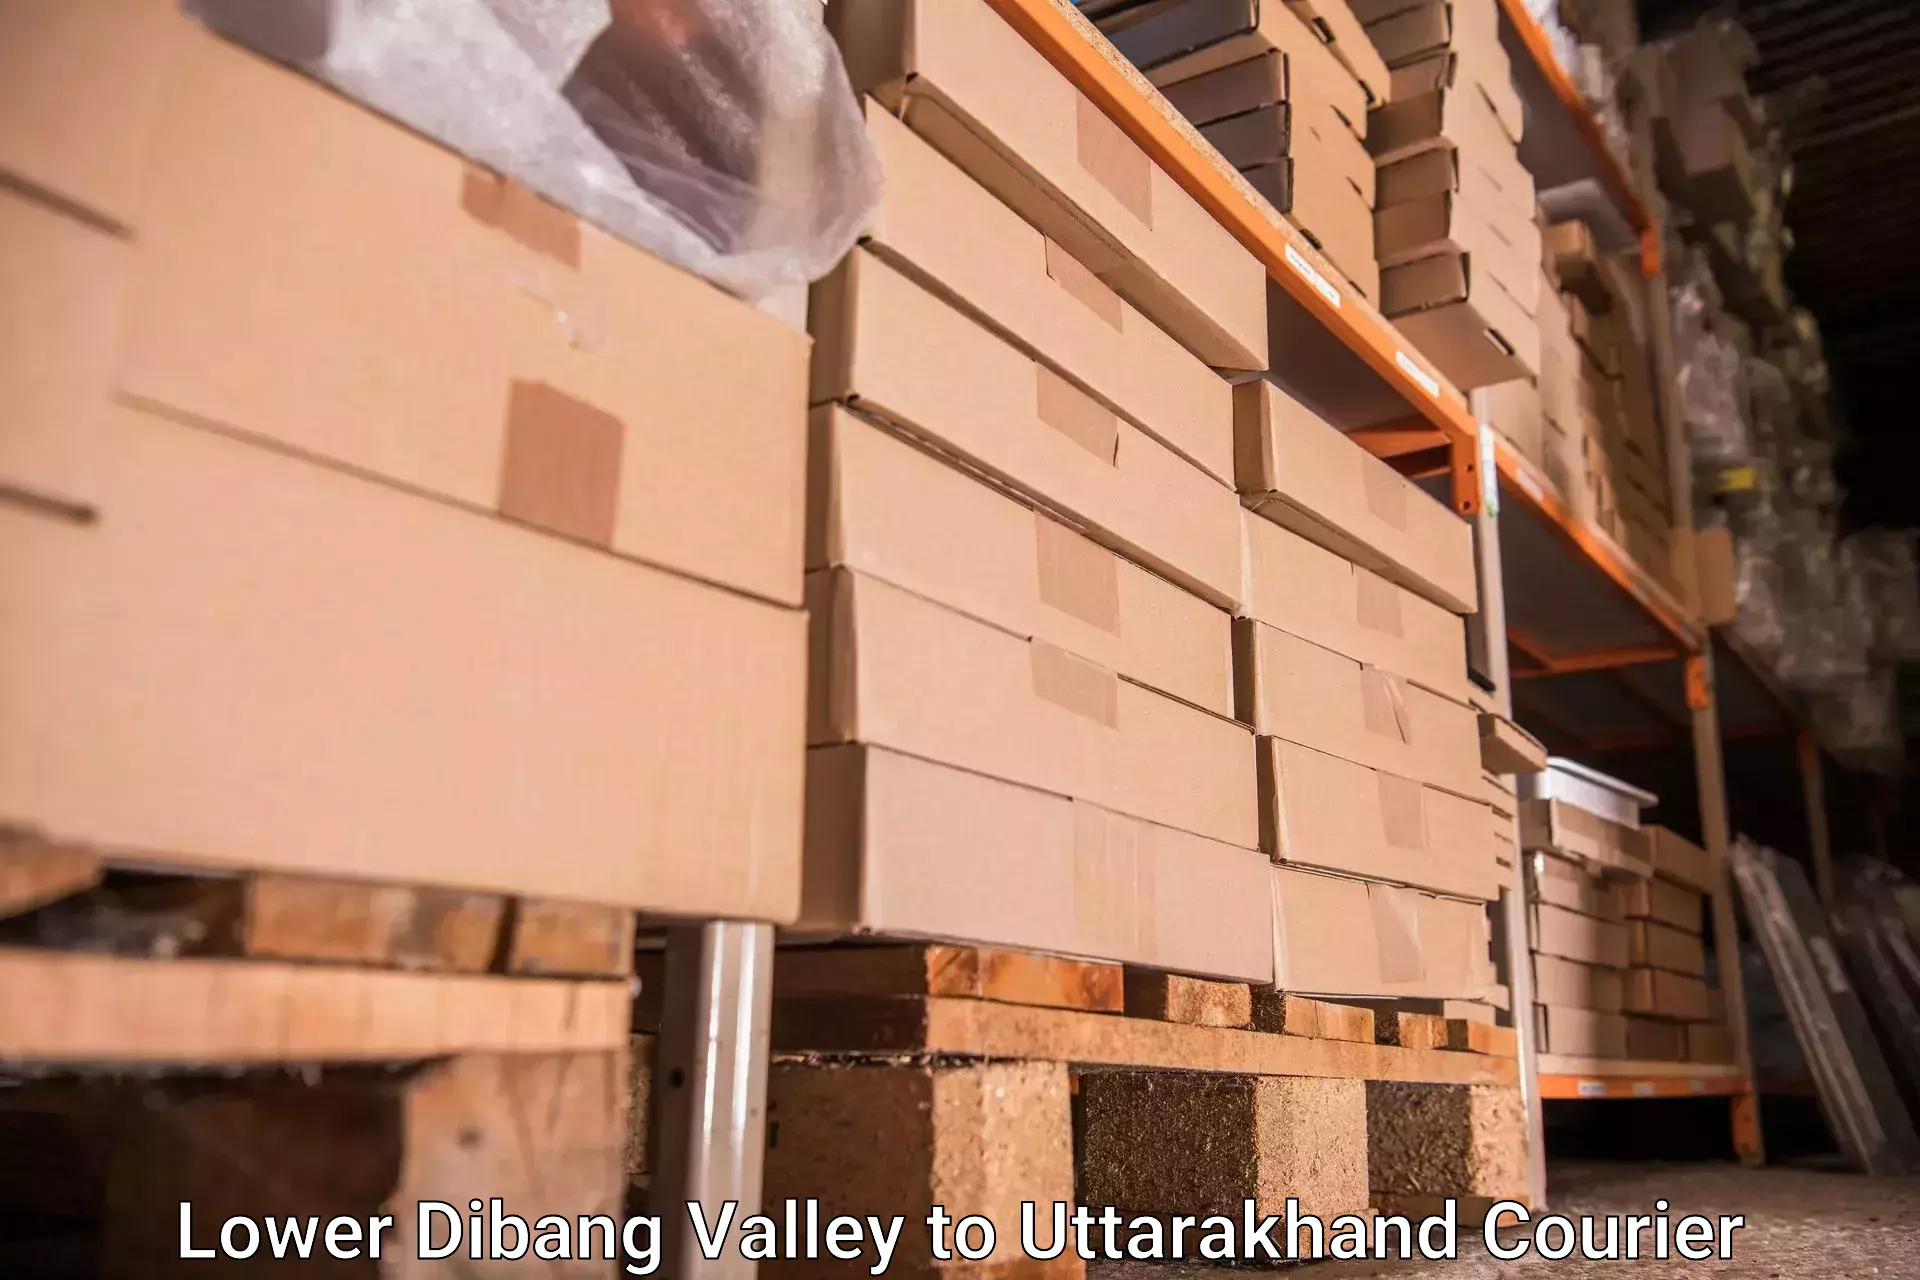 Baggage shipping service Lower Dibang Valley to Uttarakhand